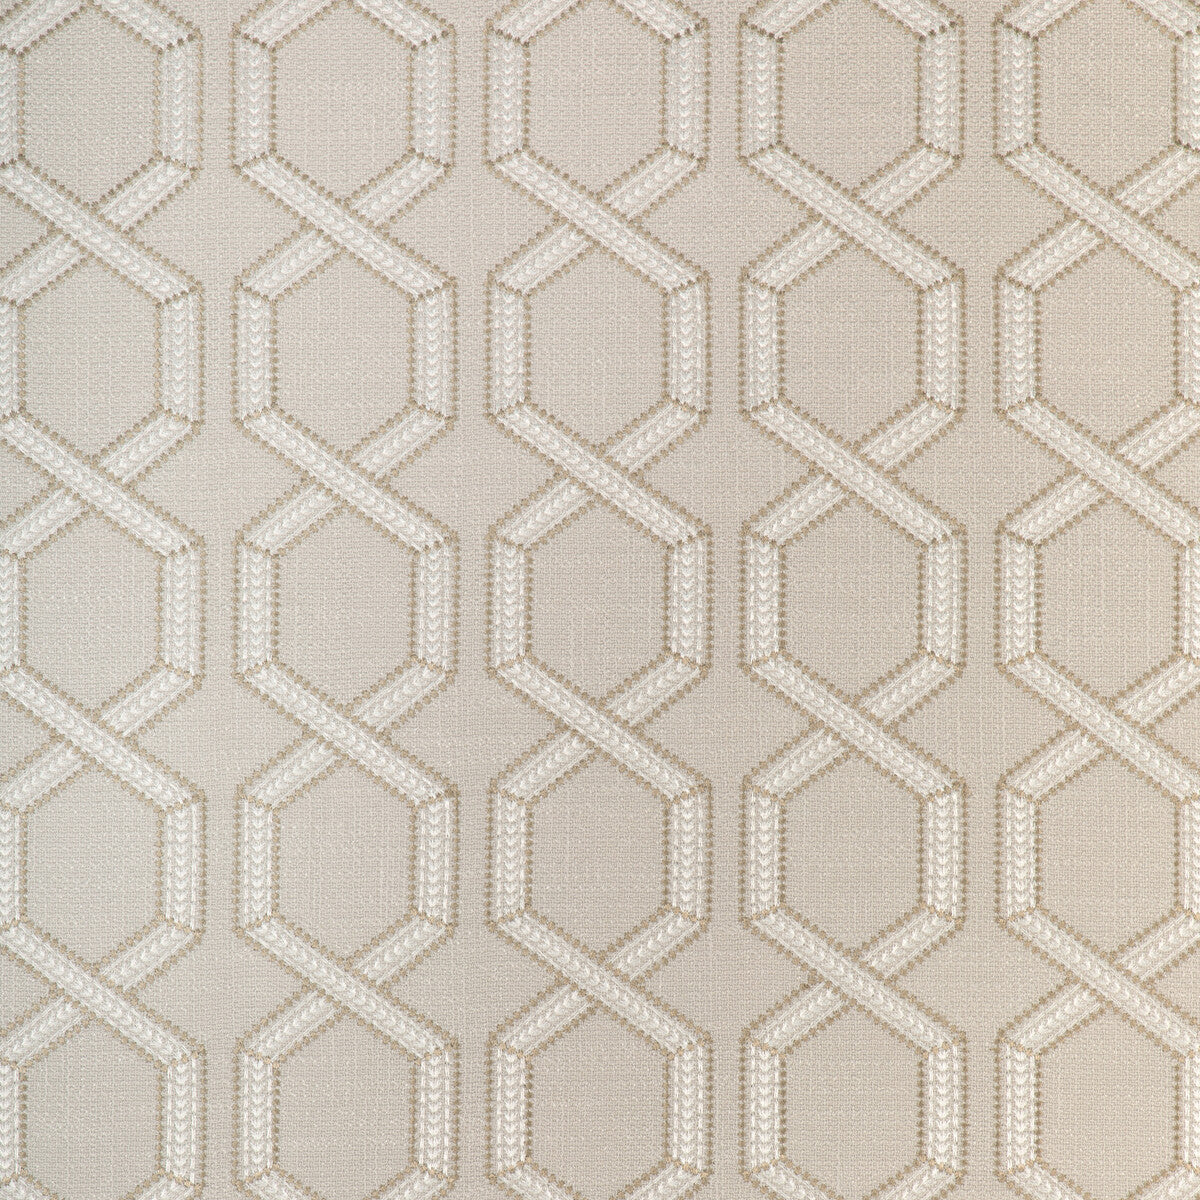 Kravet Basics fabric in 37164-416 color - pattern 37164.416.0 - by Kravet Basics in the Modern Embroideries III collection